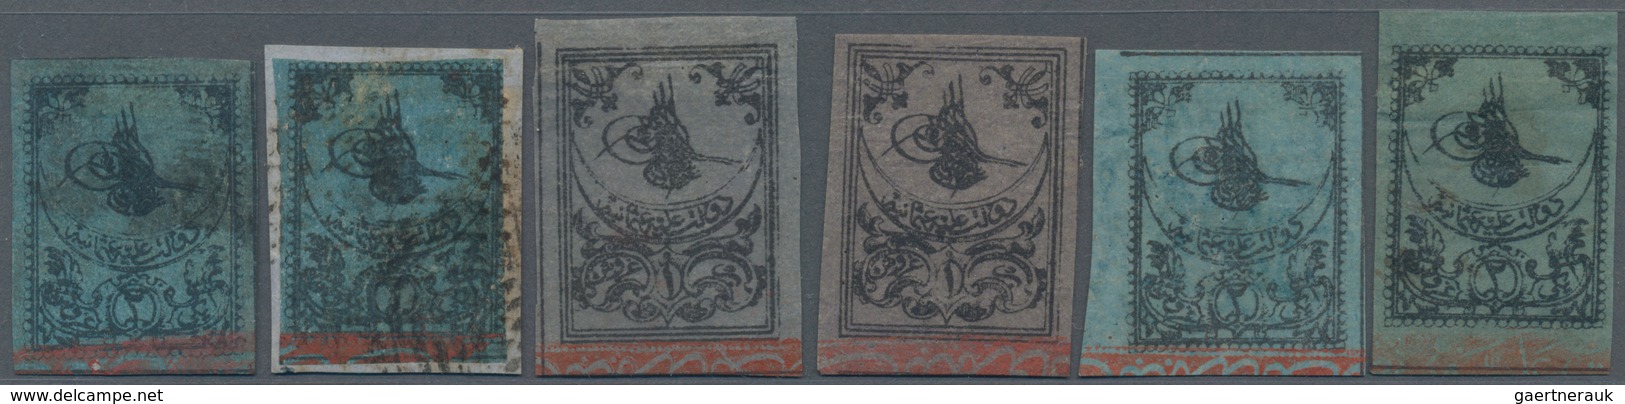 Türkei: 1863-1930, Small Lot Of 11 First Issues "Tughra" And Few Republic Stamps Up To Atatürk, Fine - Usados